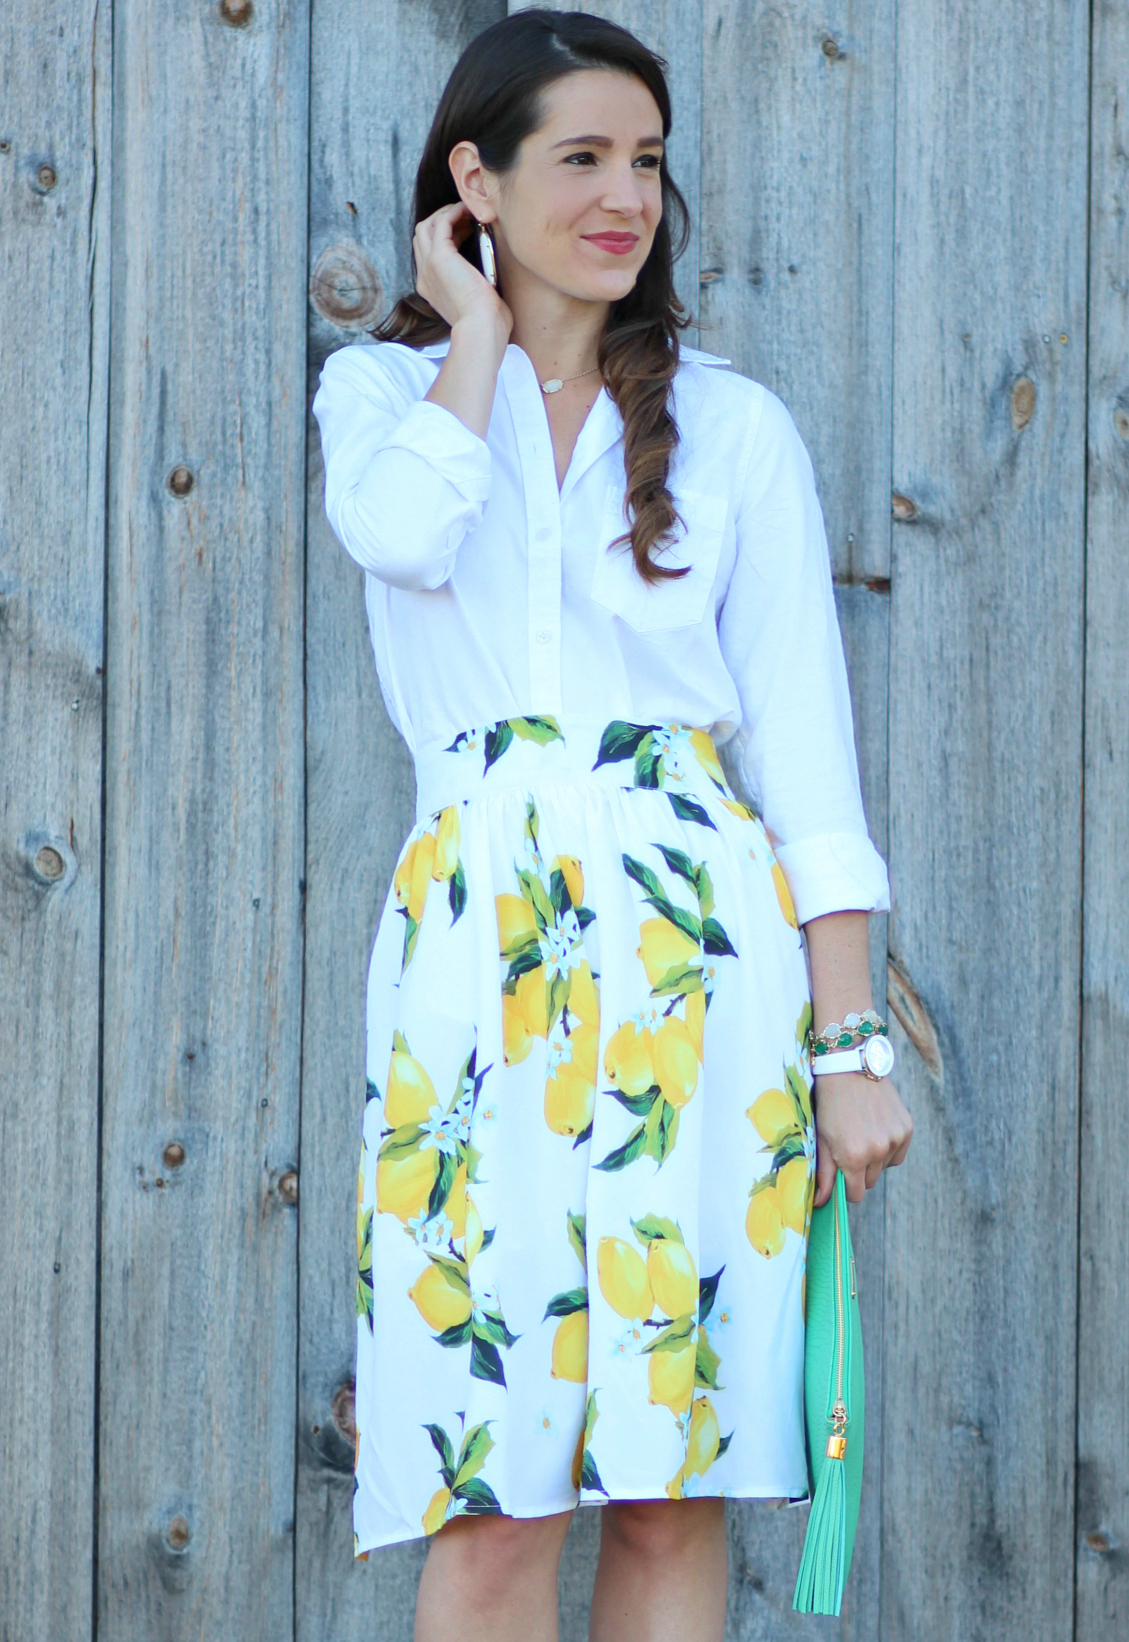 Zaful lemon print skirt with a white J.Crew Factory oxford and kelly green clutch